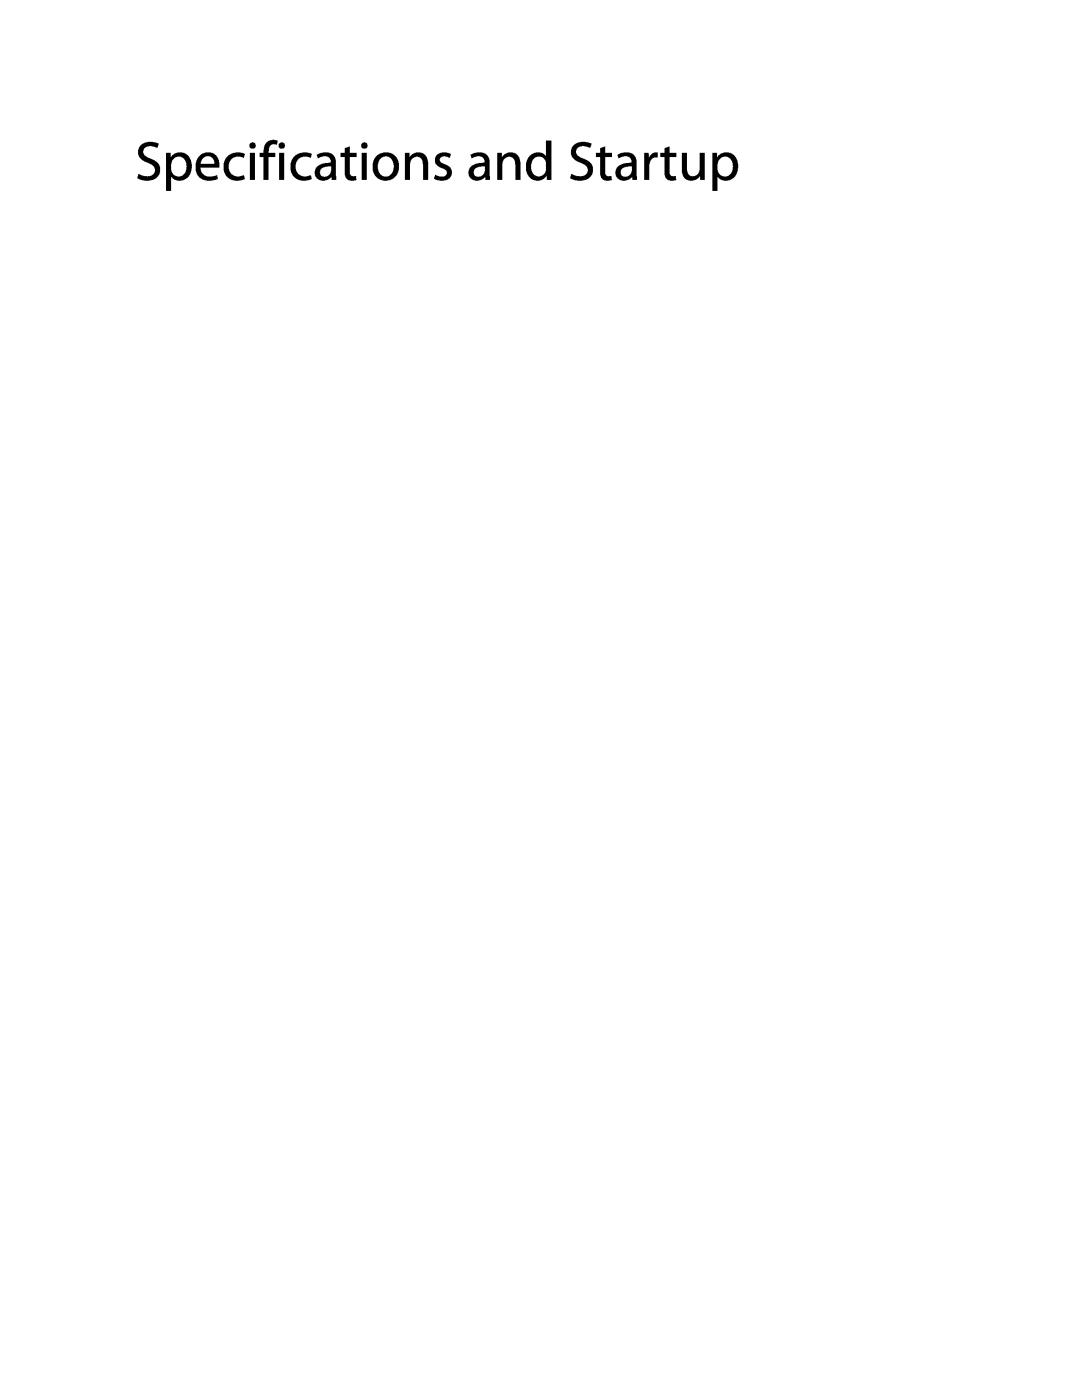 Turbo Chef Technologies 3240 manual Specifications and Startup 